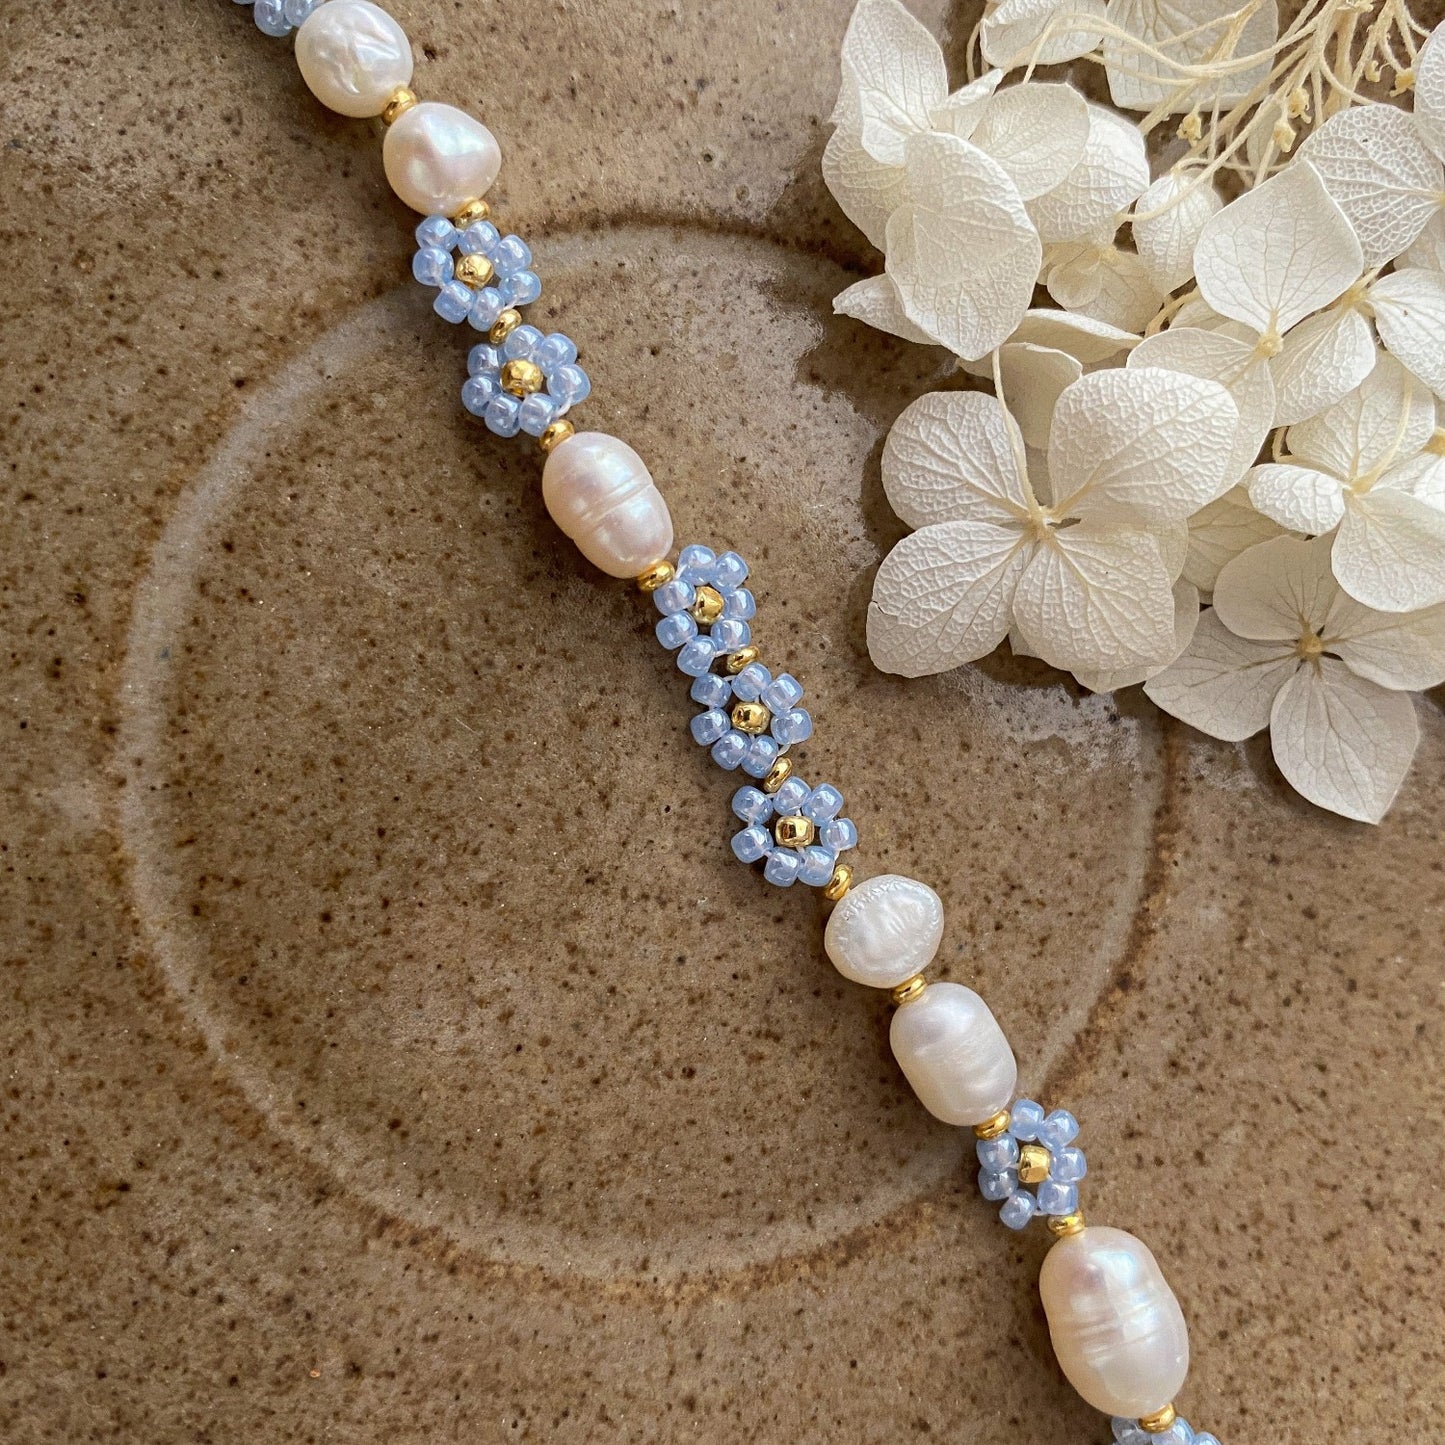 Pearl bracelet with blue flowers